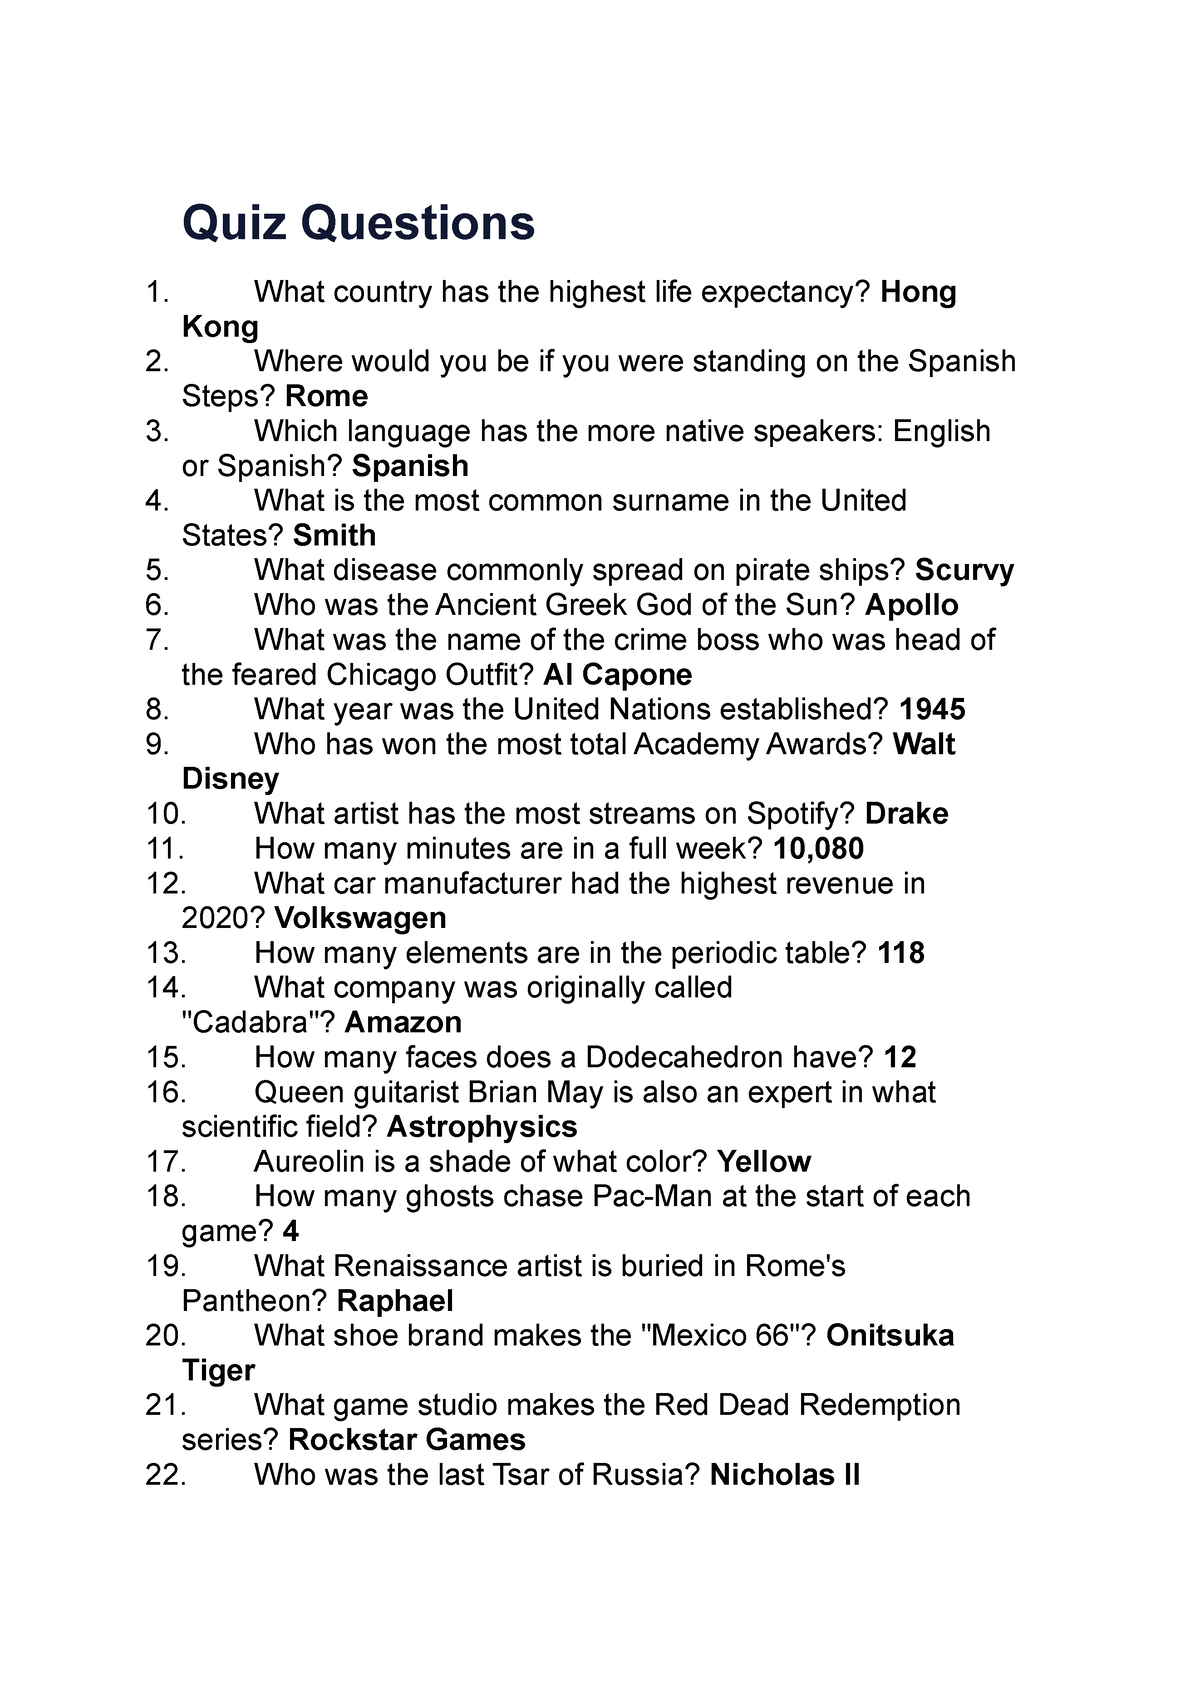 quiz-questions-copy-none-quiz-questions-1-what-country-has-the